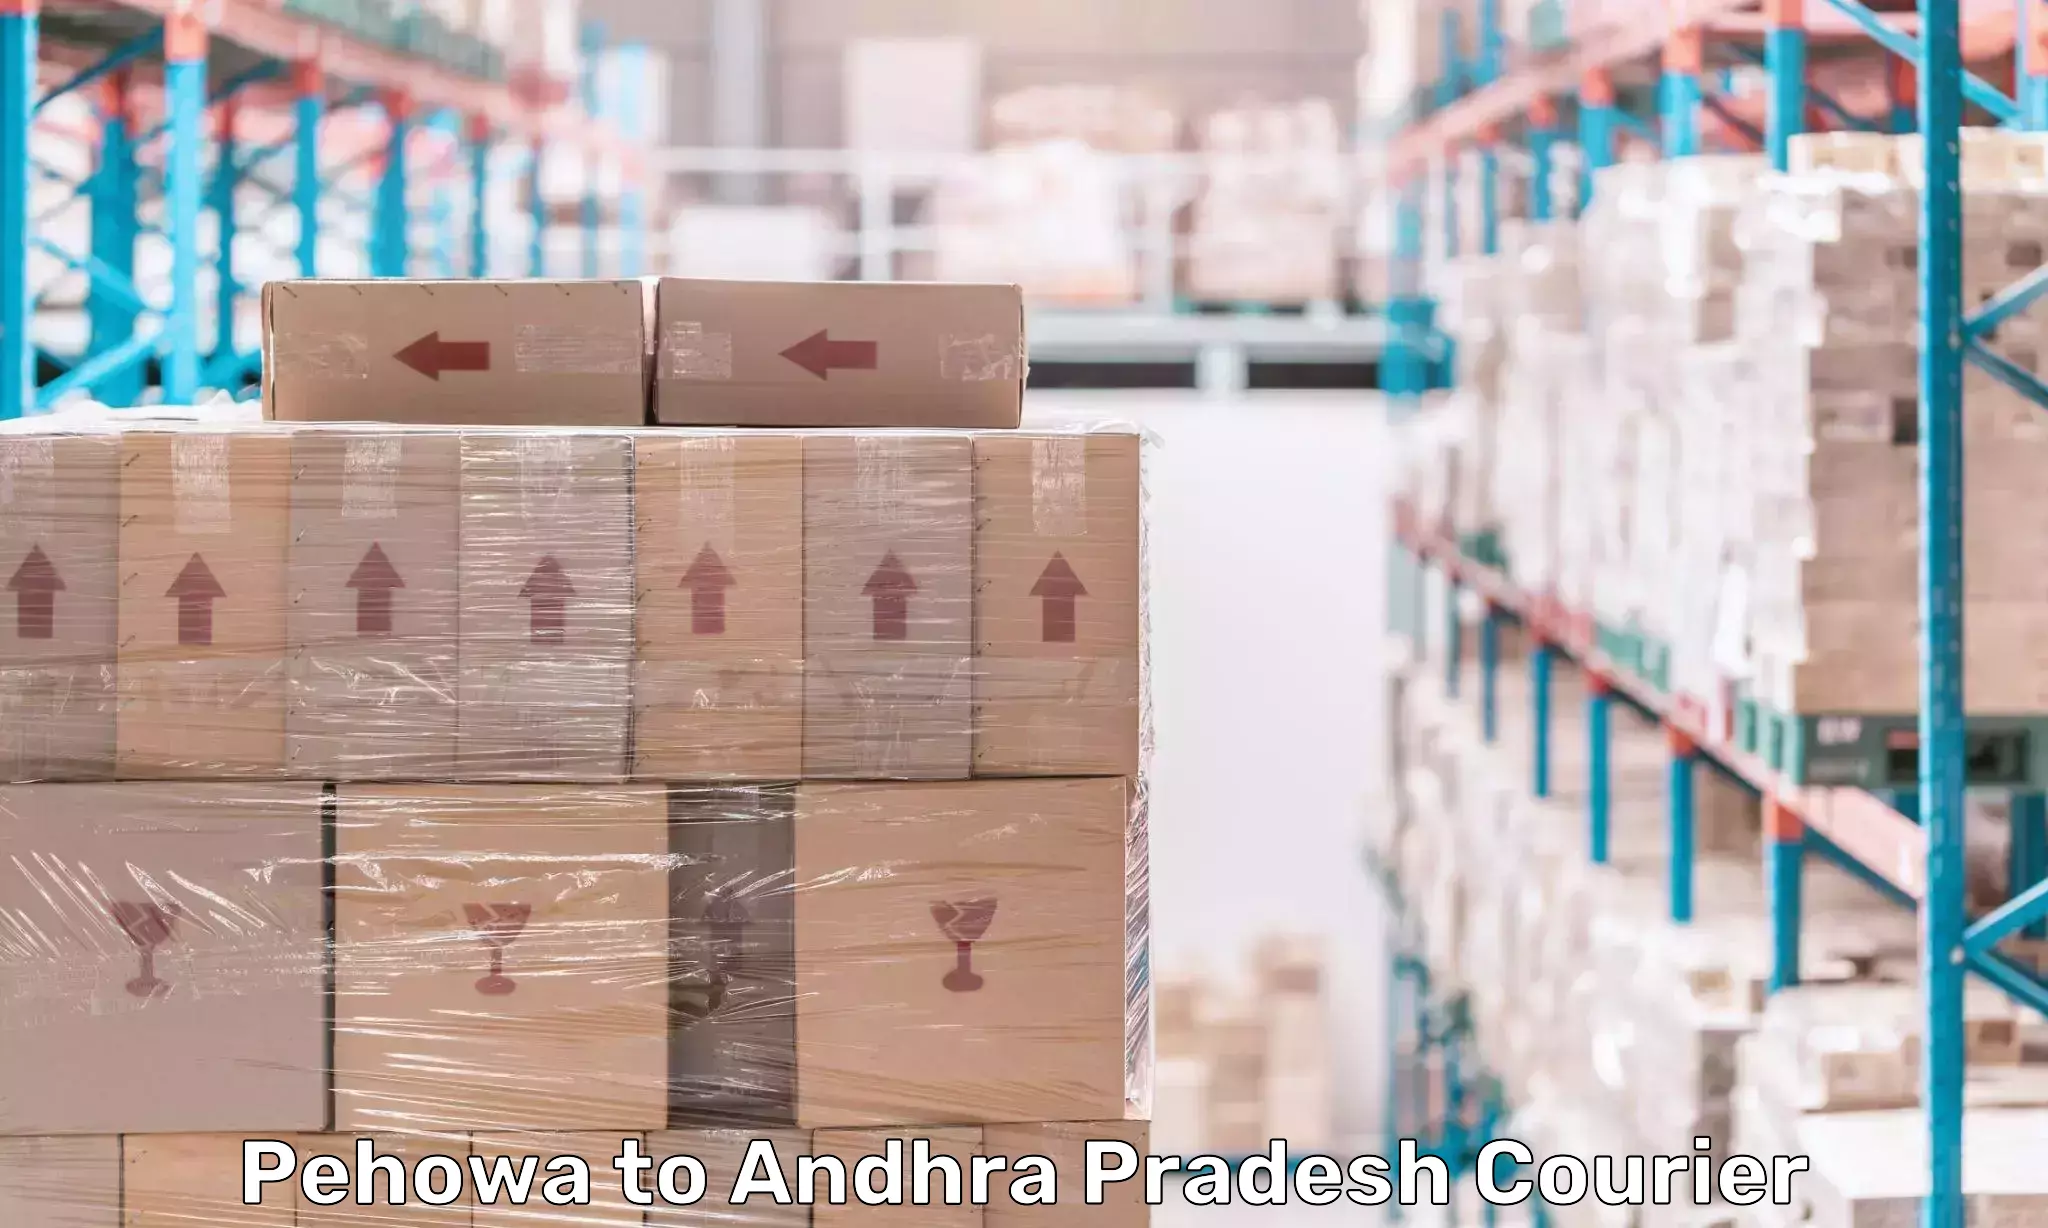 On-call courier service Pehowa to Andhra Pradesh